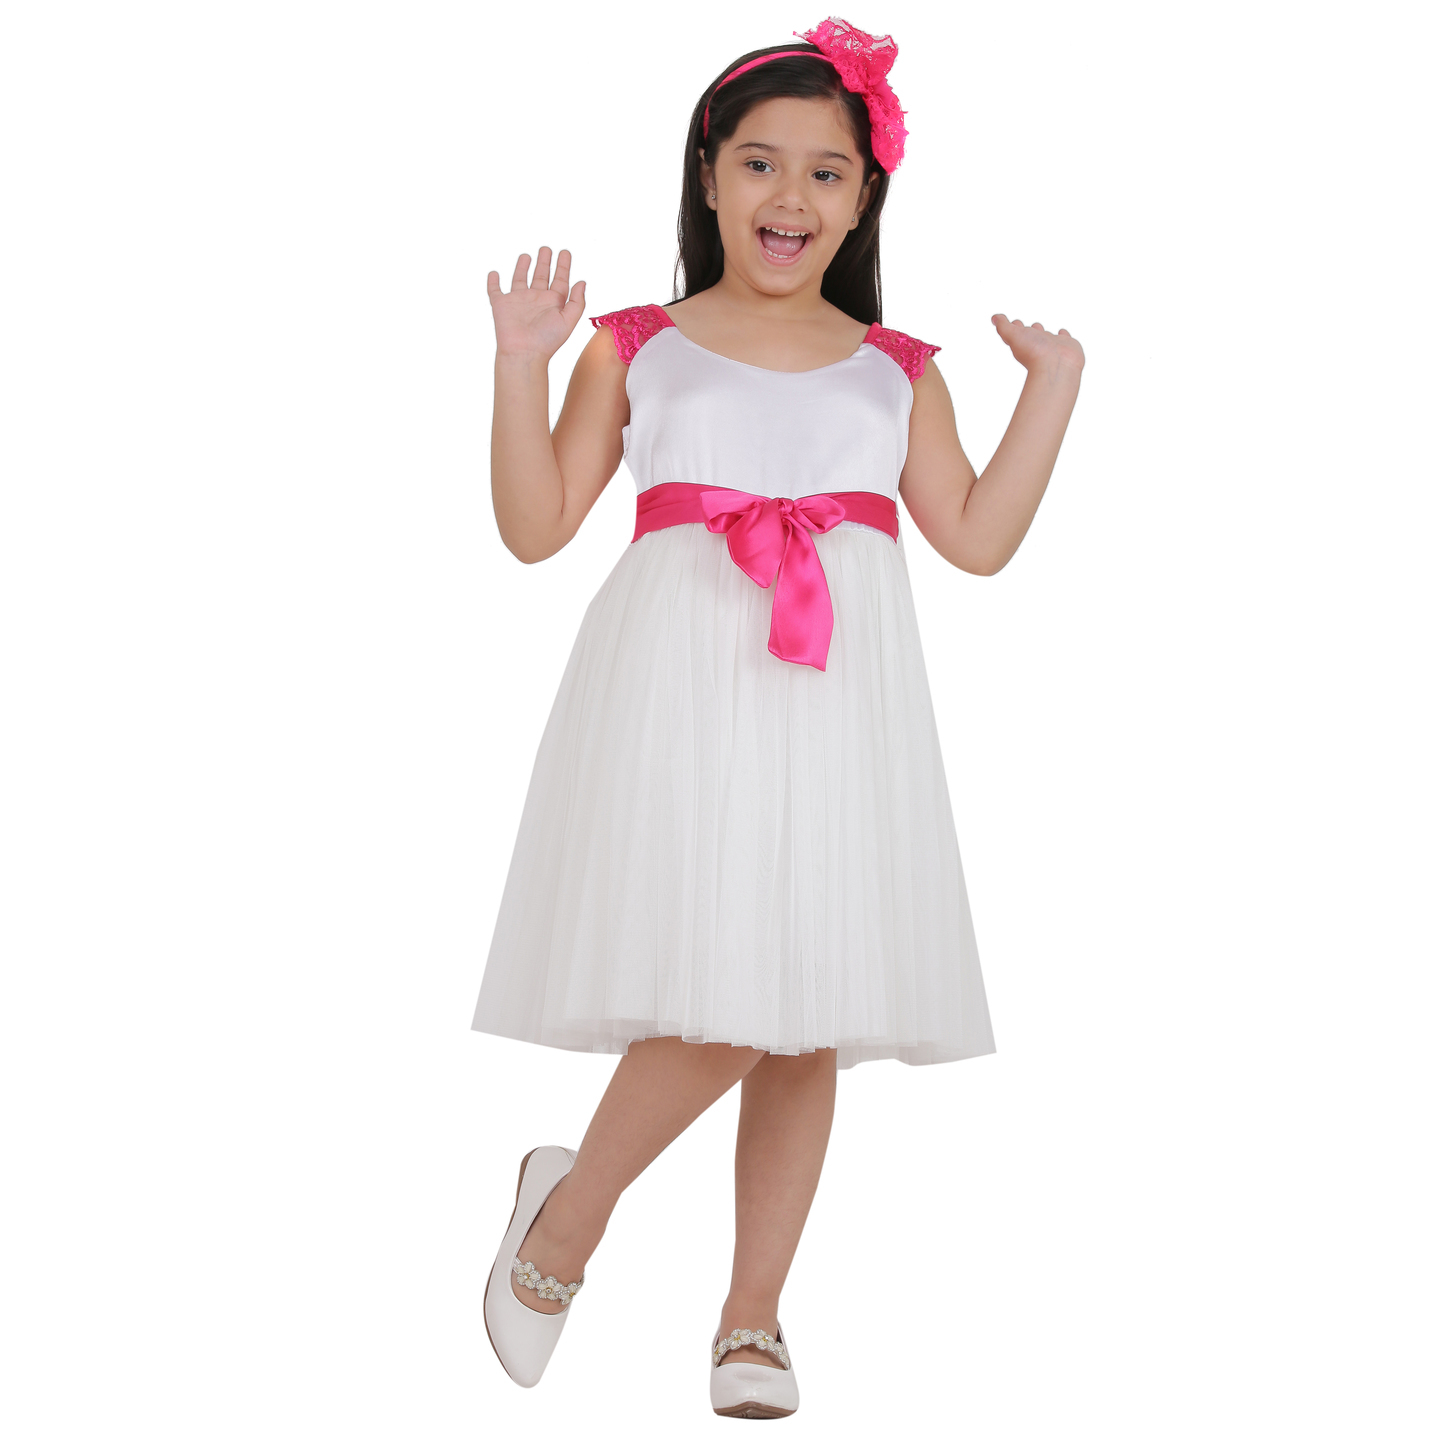 Girls White and Pink Midiknee Length Party Dress